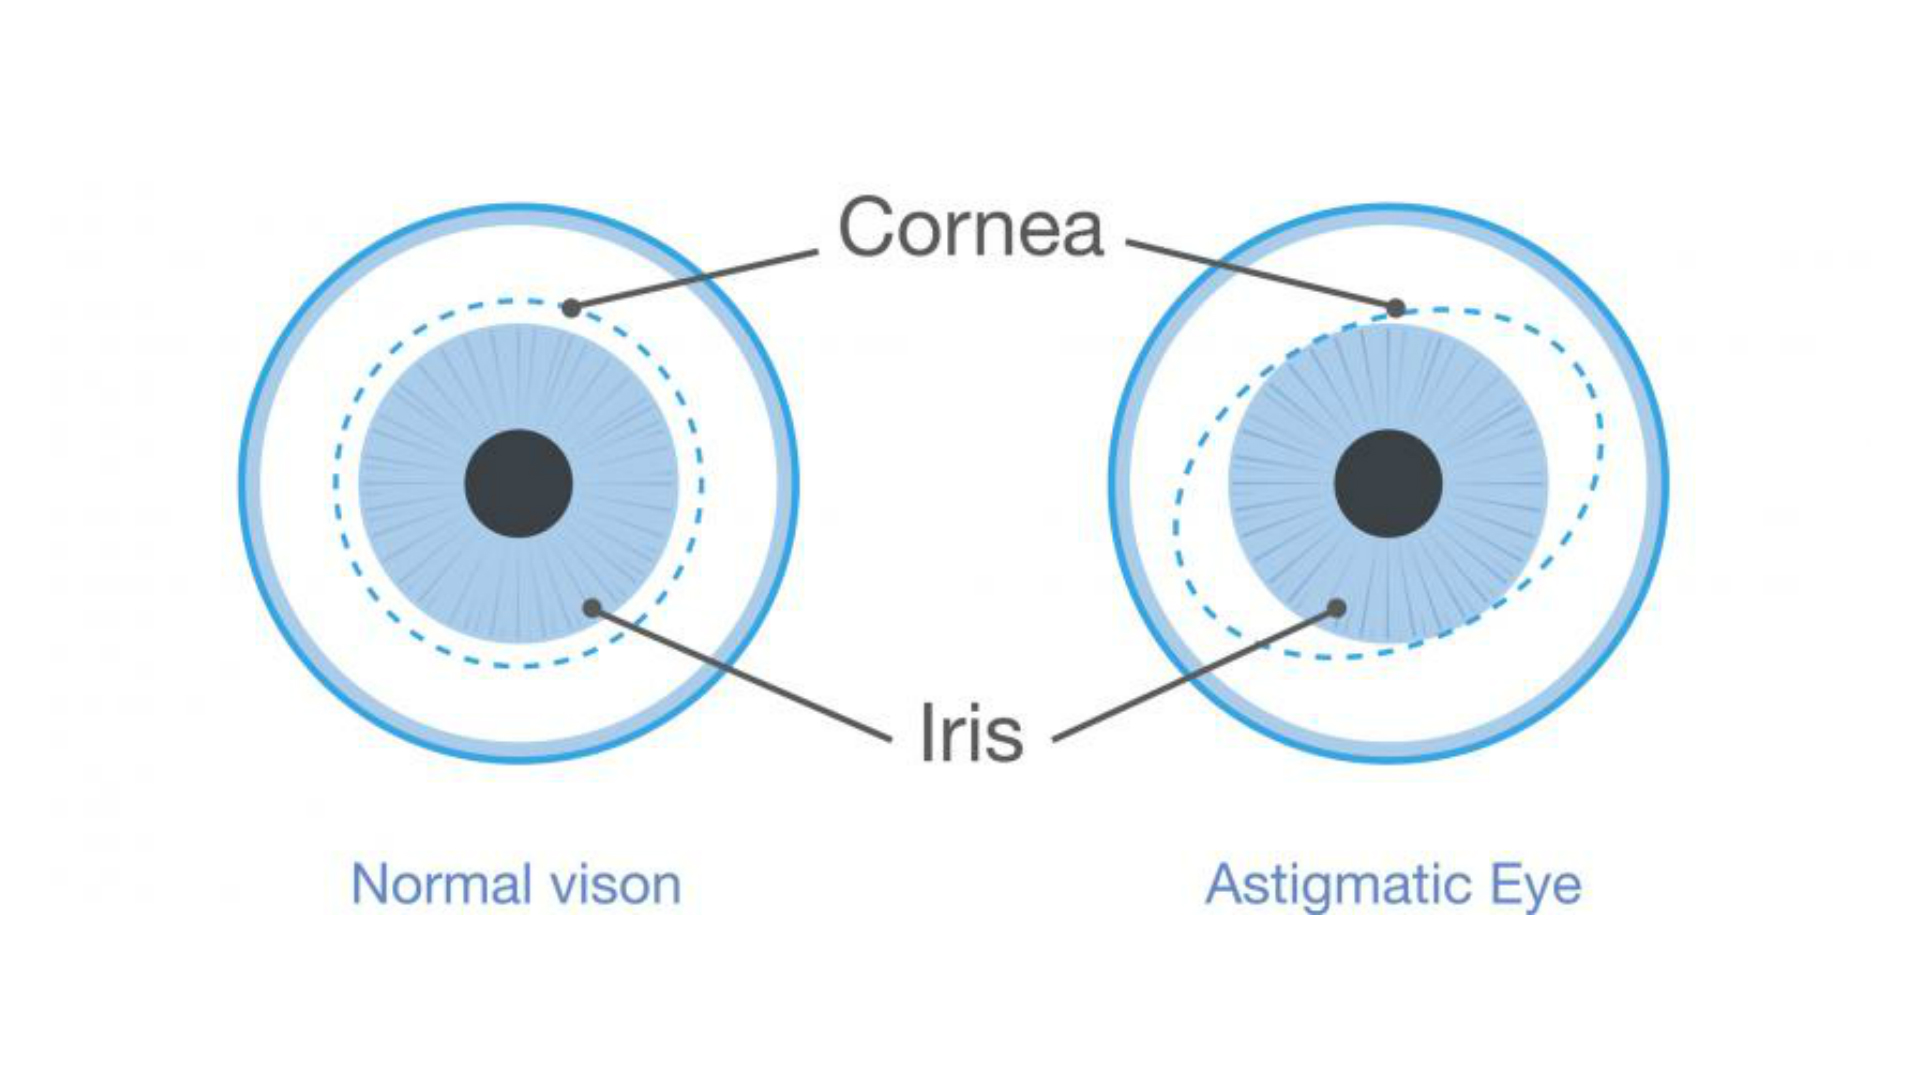 Astigmatism graphic showing difference between normal and astigmatic eye